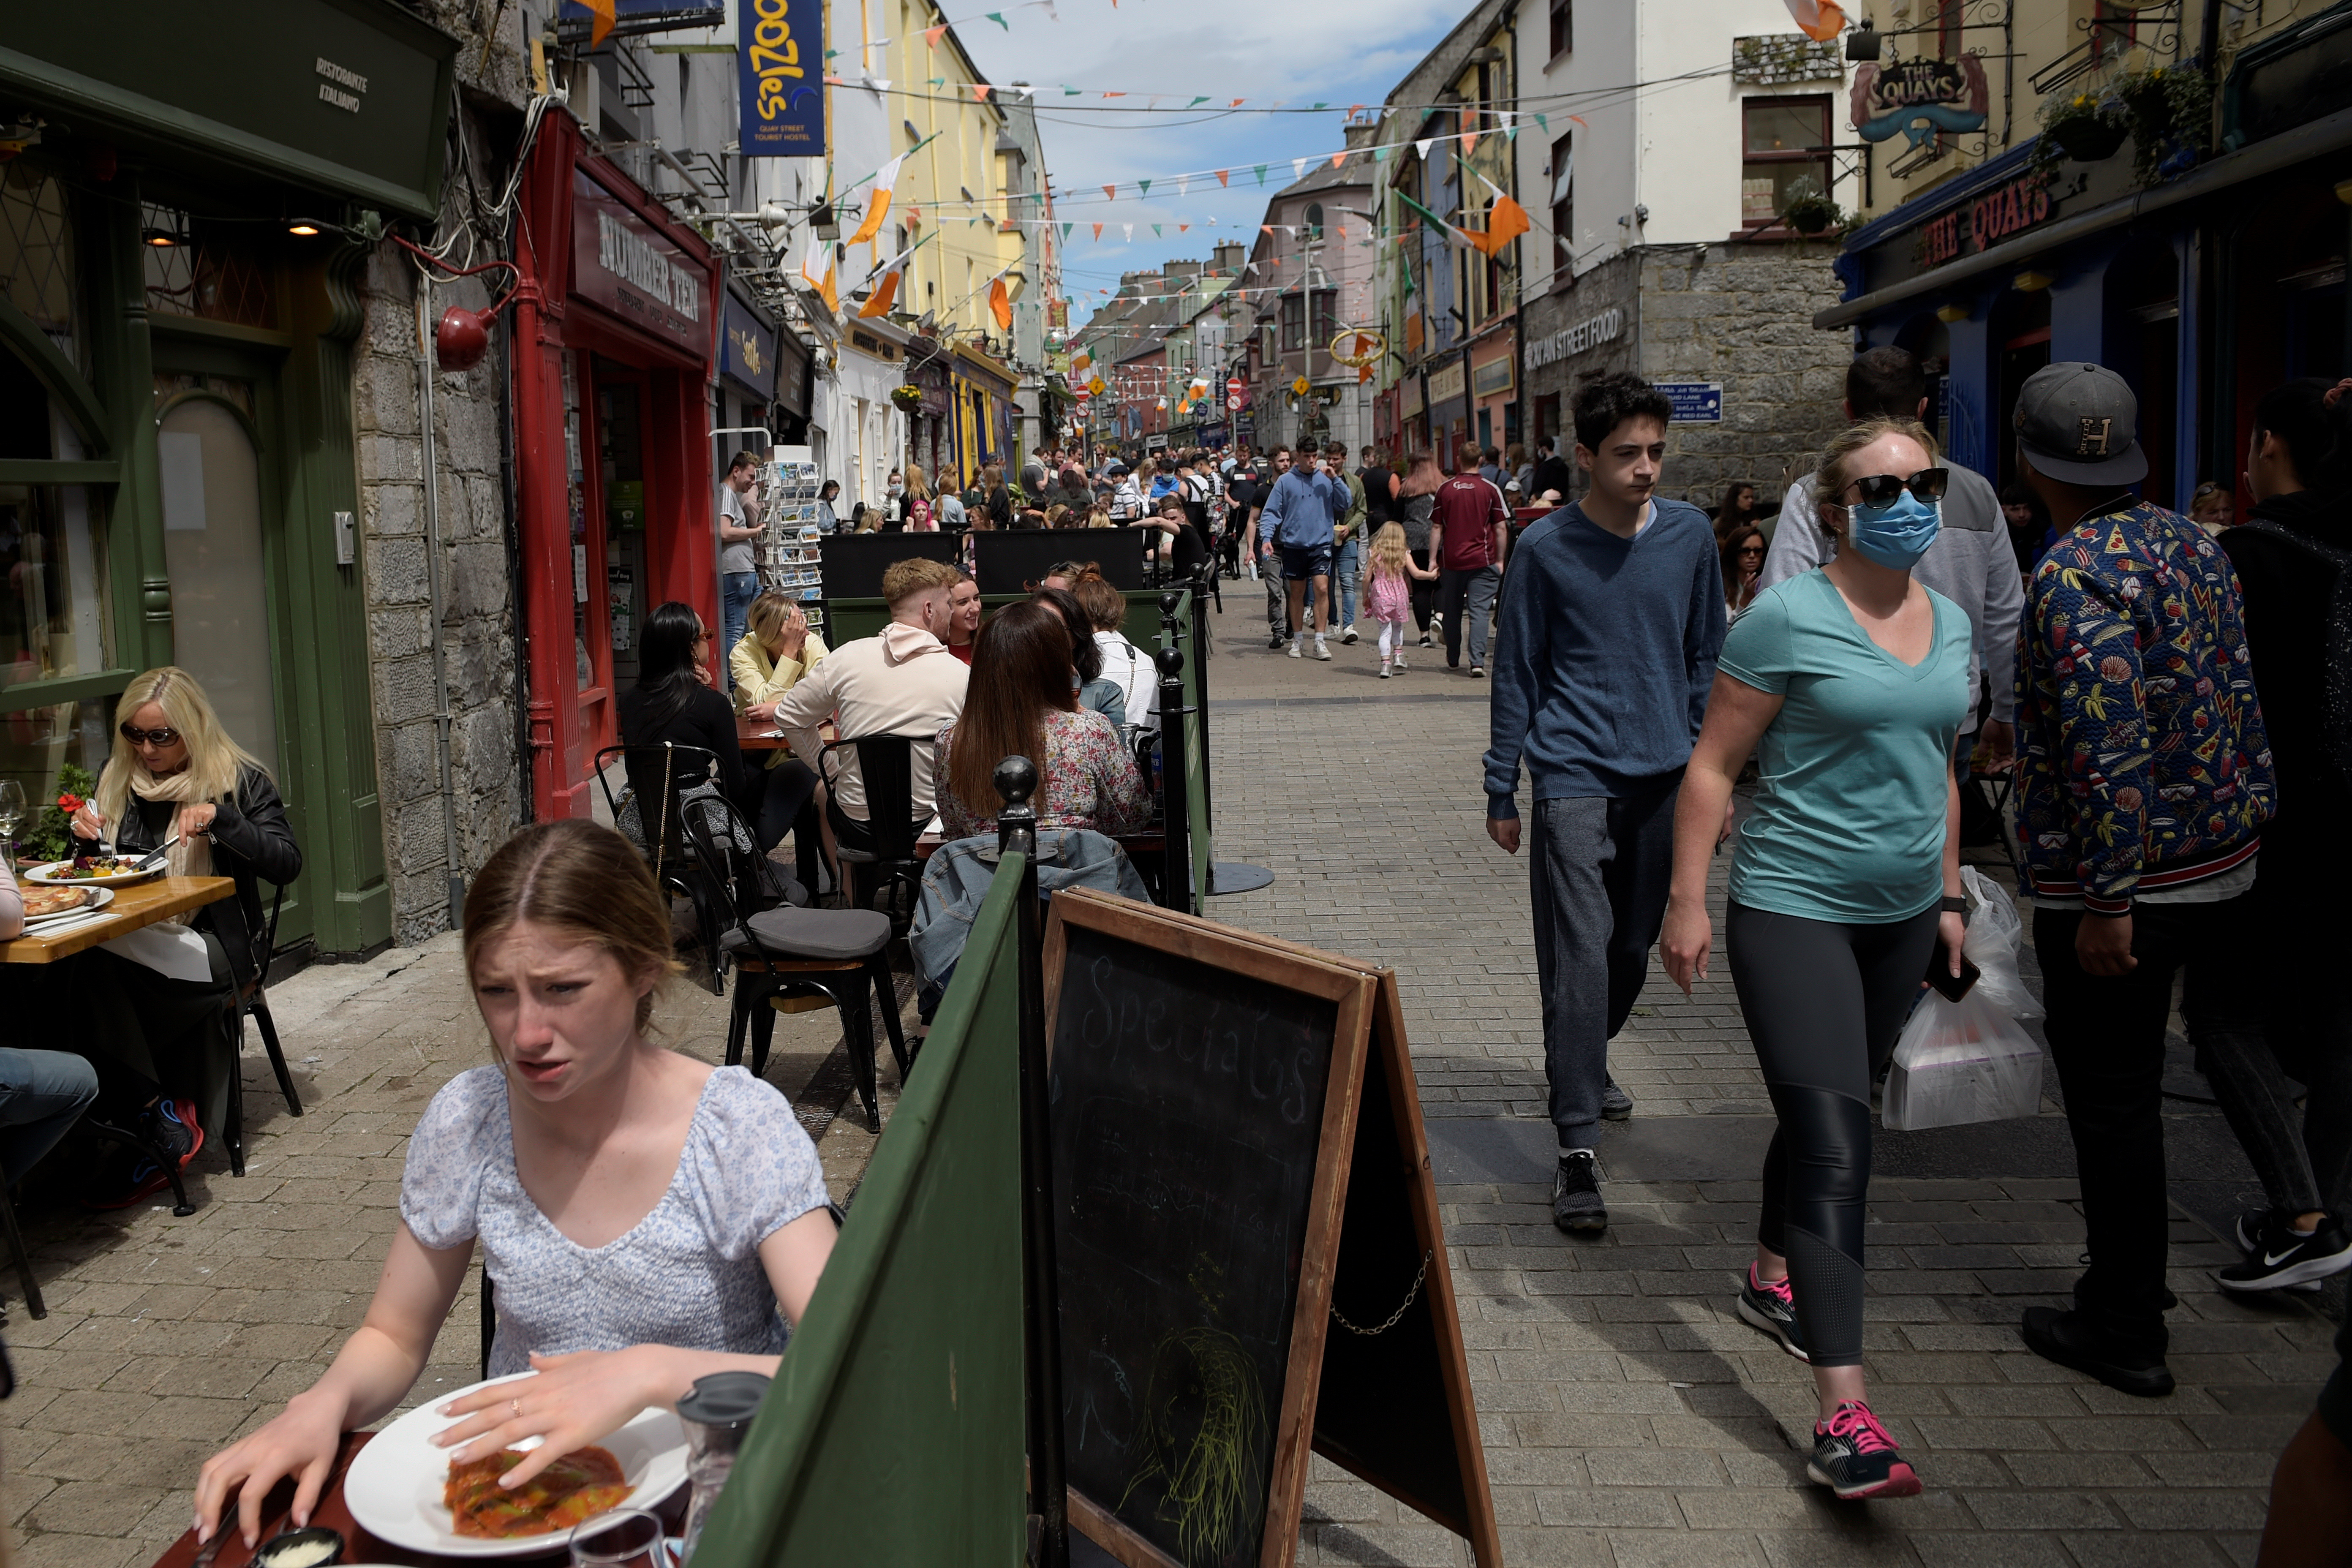 COVID-19 restrictions continue to ease in Ireland